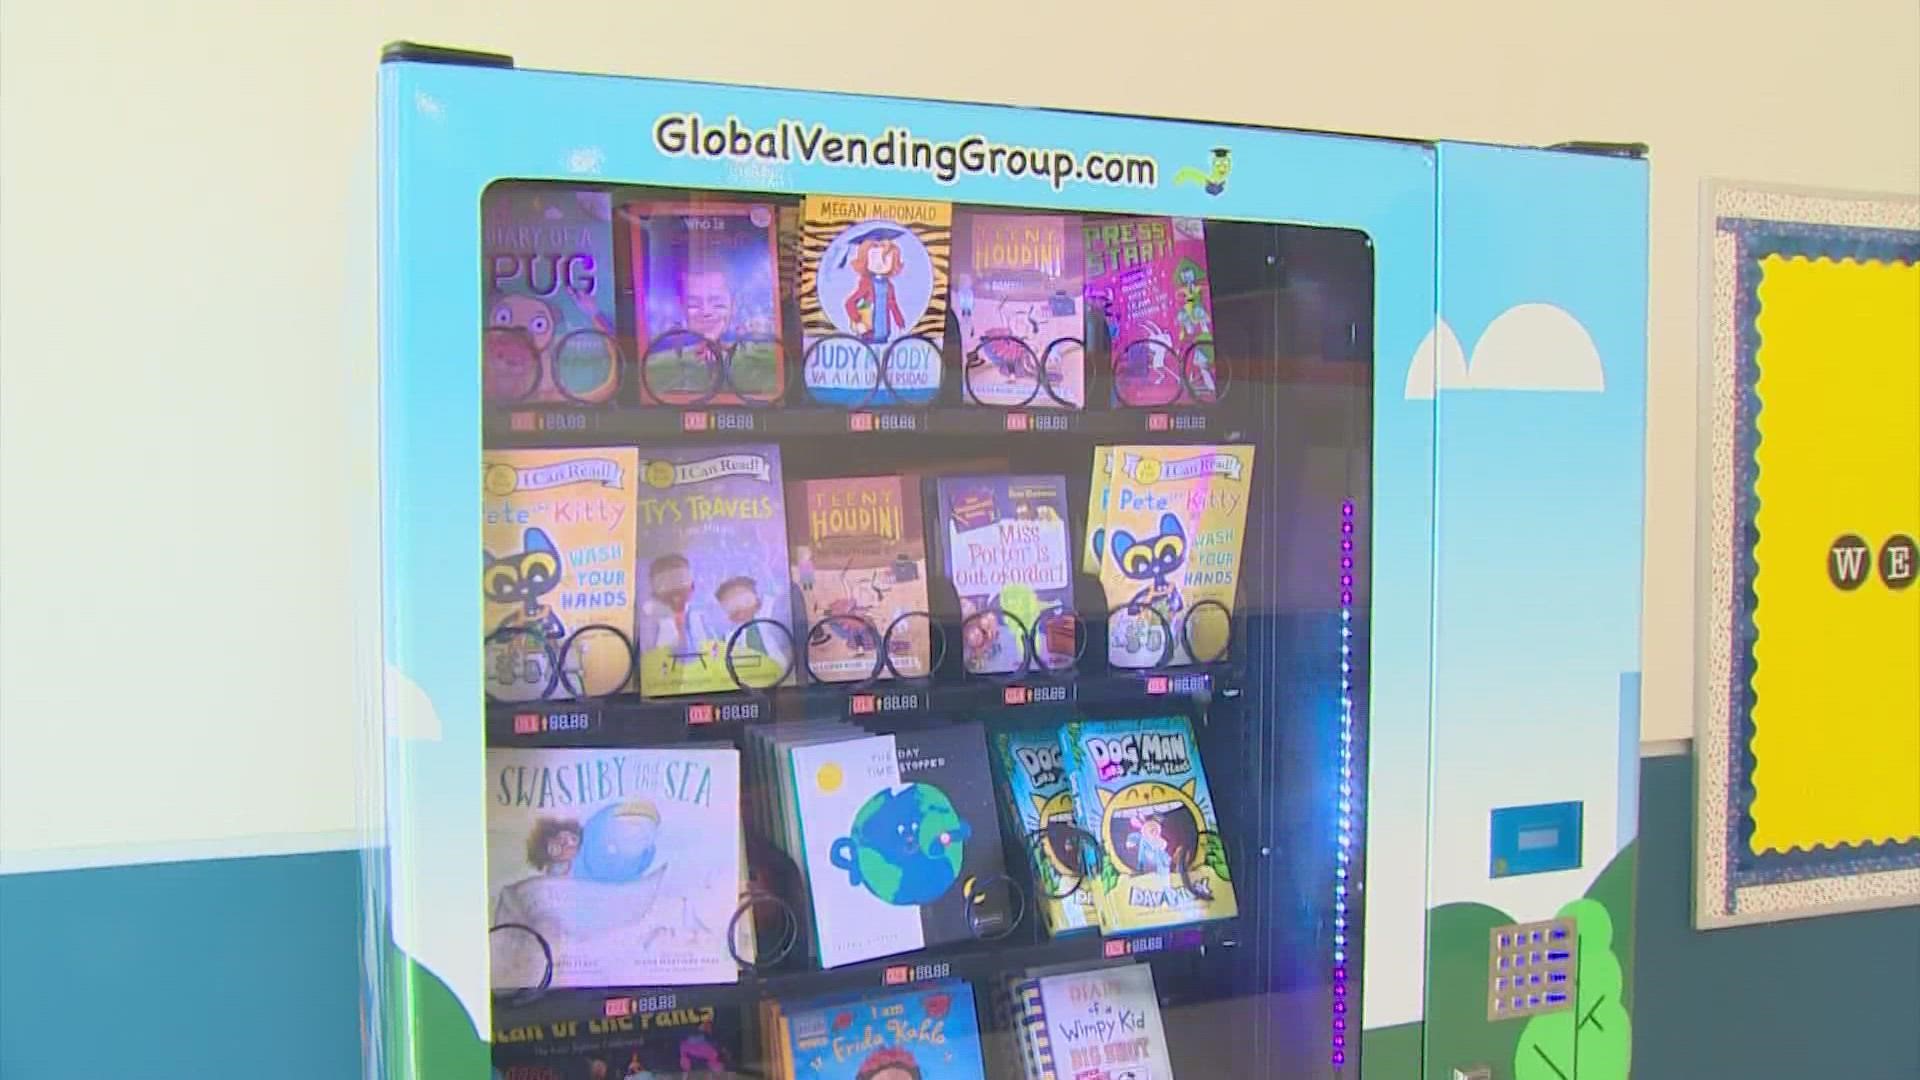 The vending machine distributes books for a variety of different interests and in different languages.